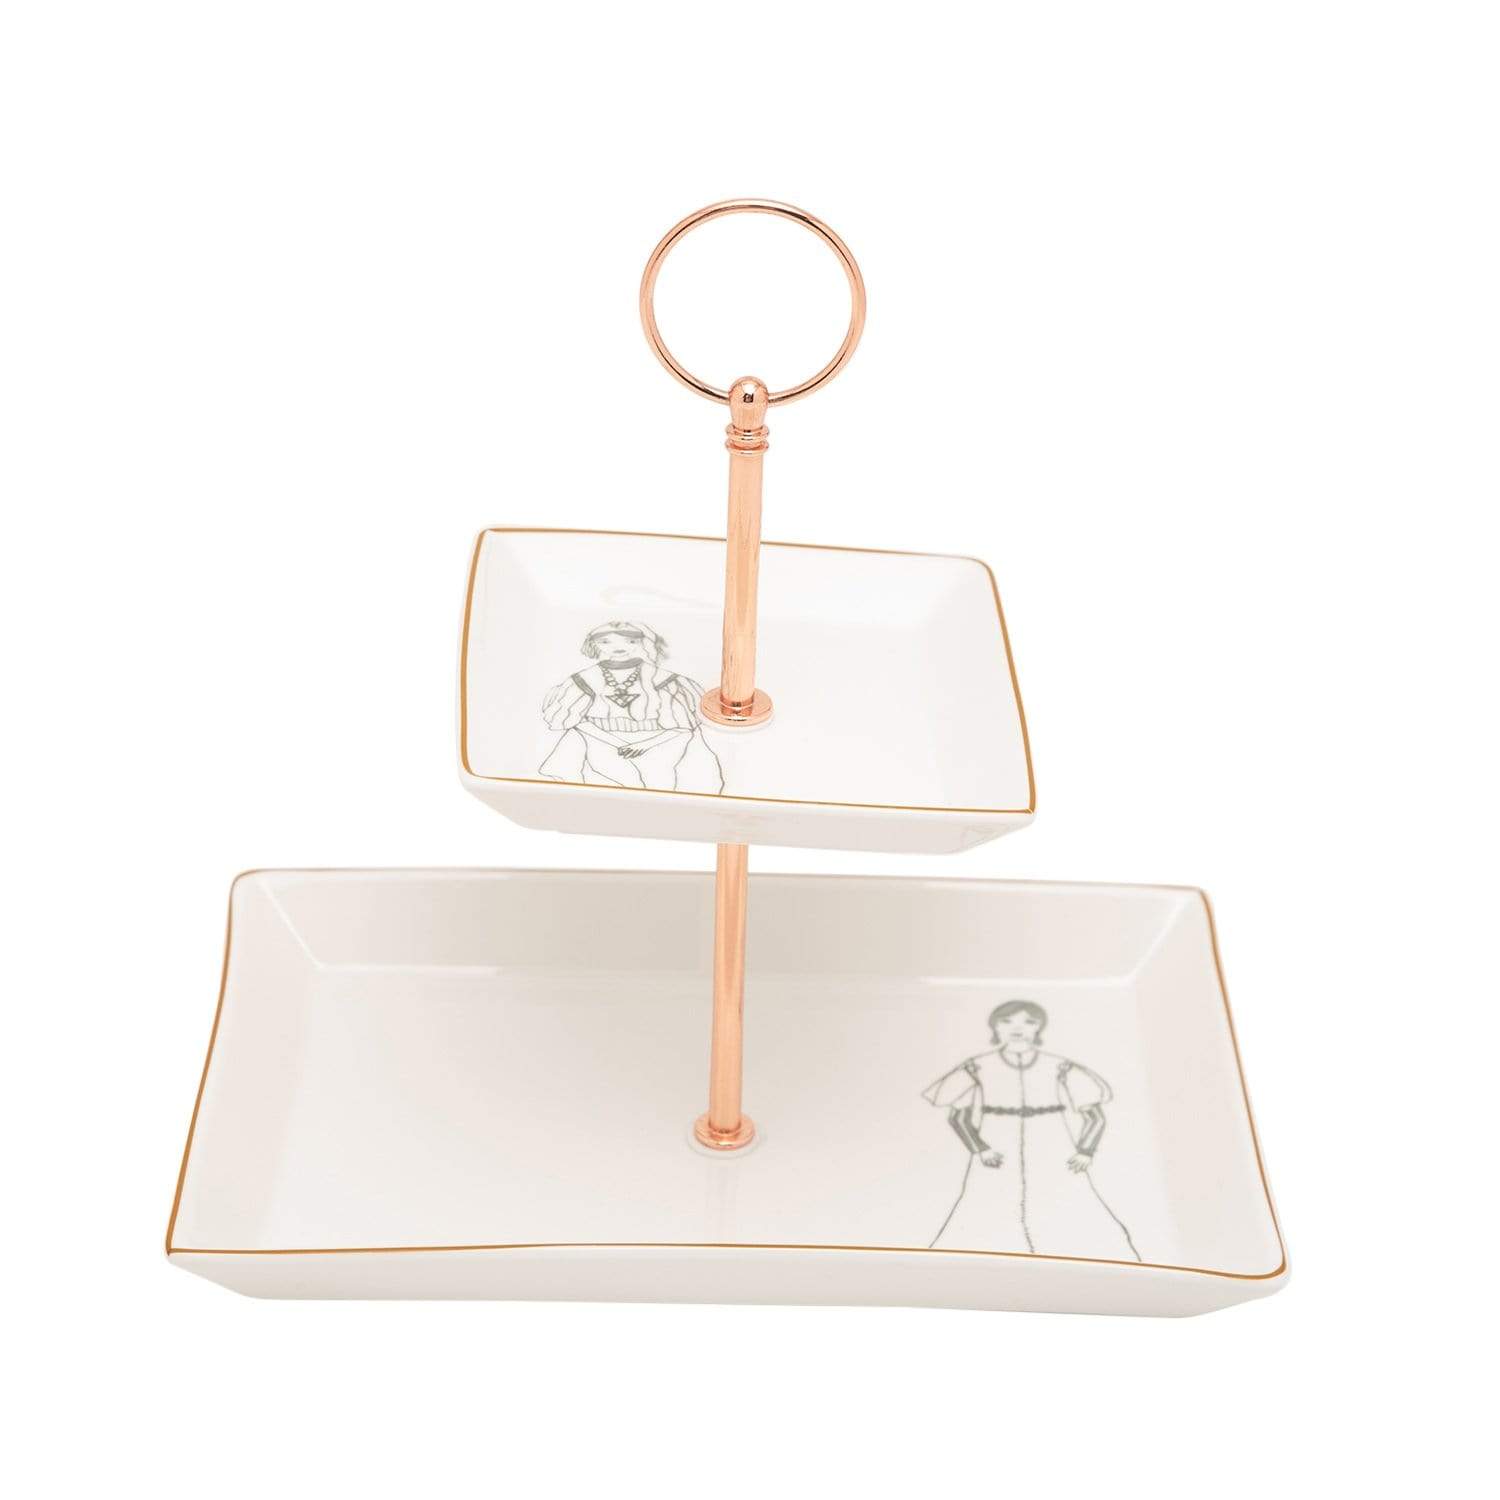 L'atelier FB Zaman 2 Levels Square Plate with Holder - TC 4712 015 - Jashanmal Home